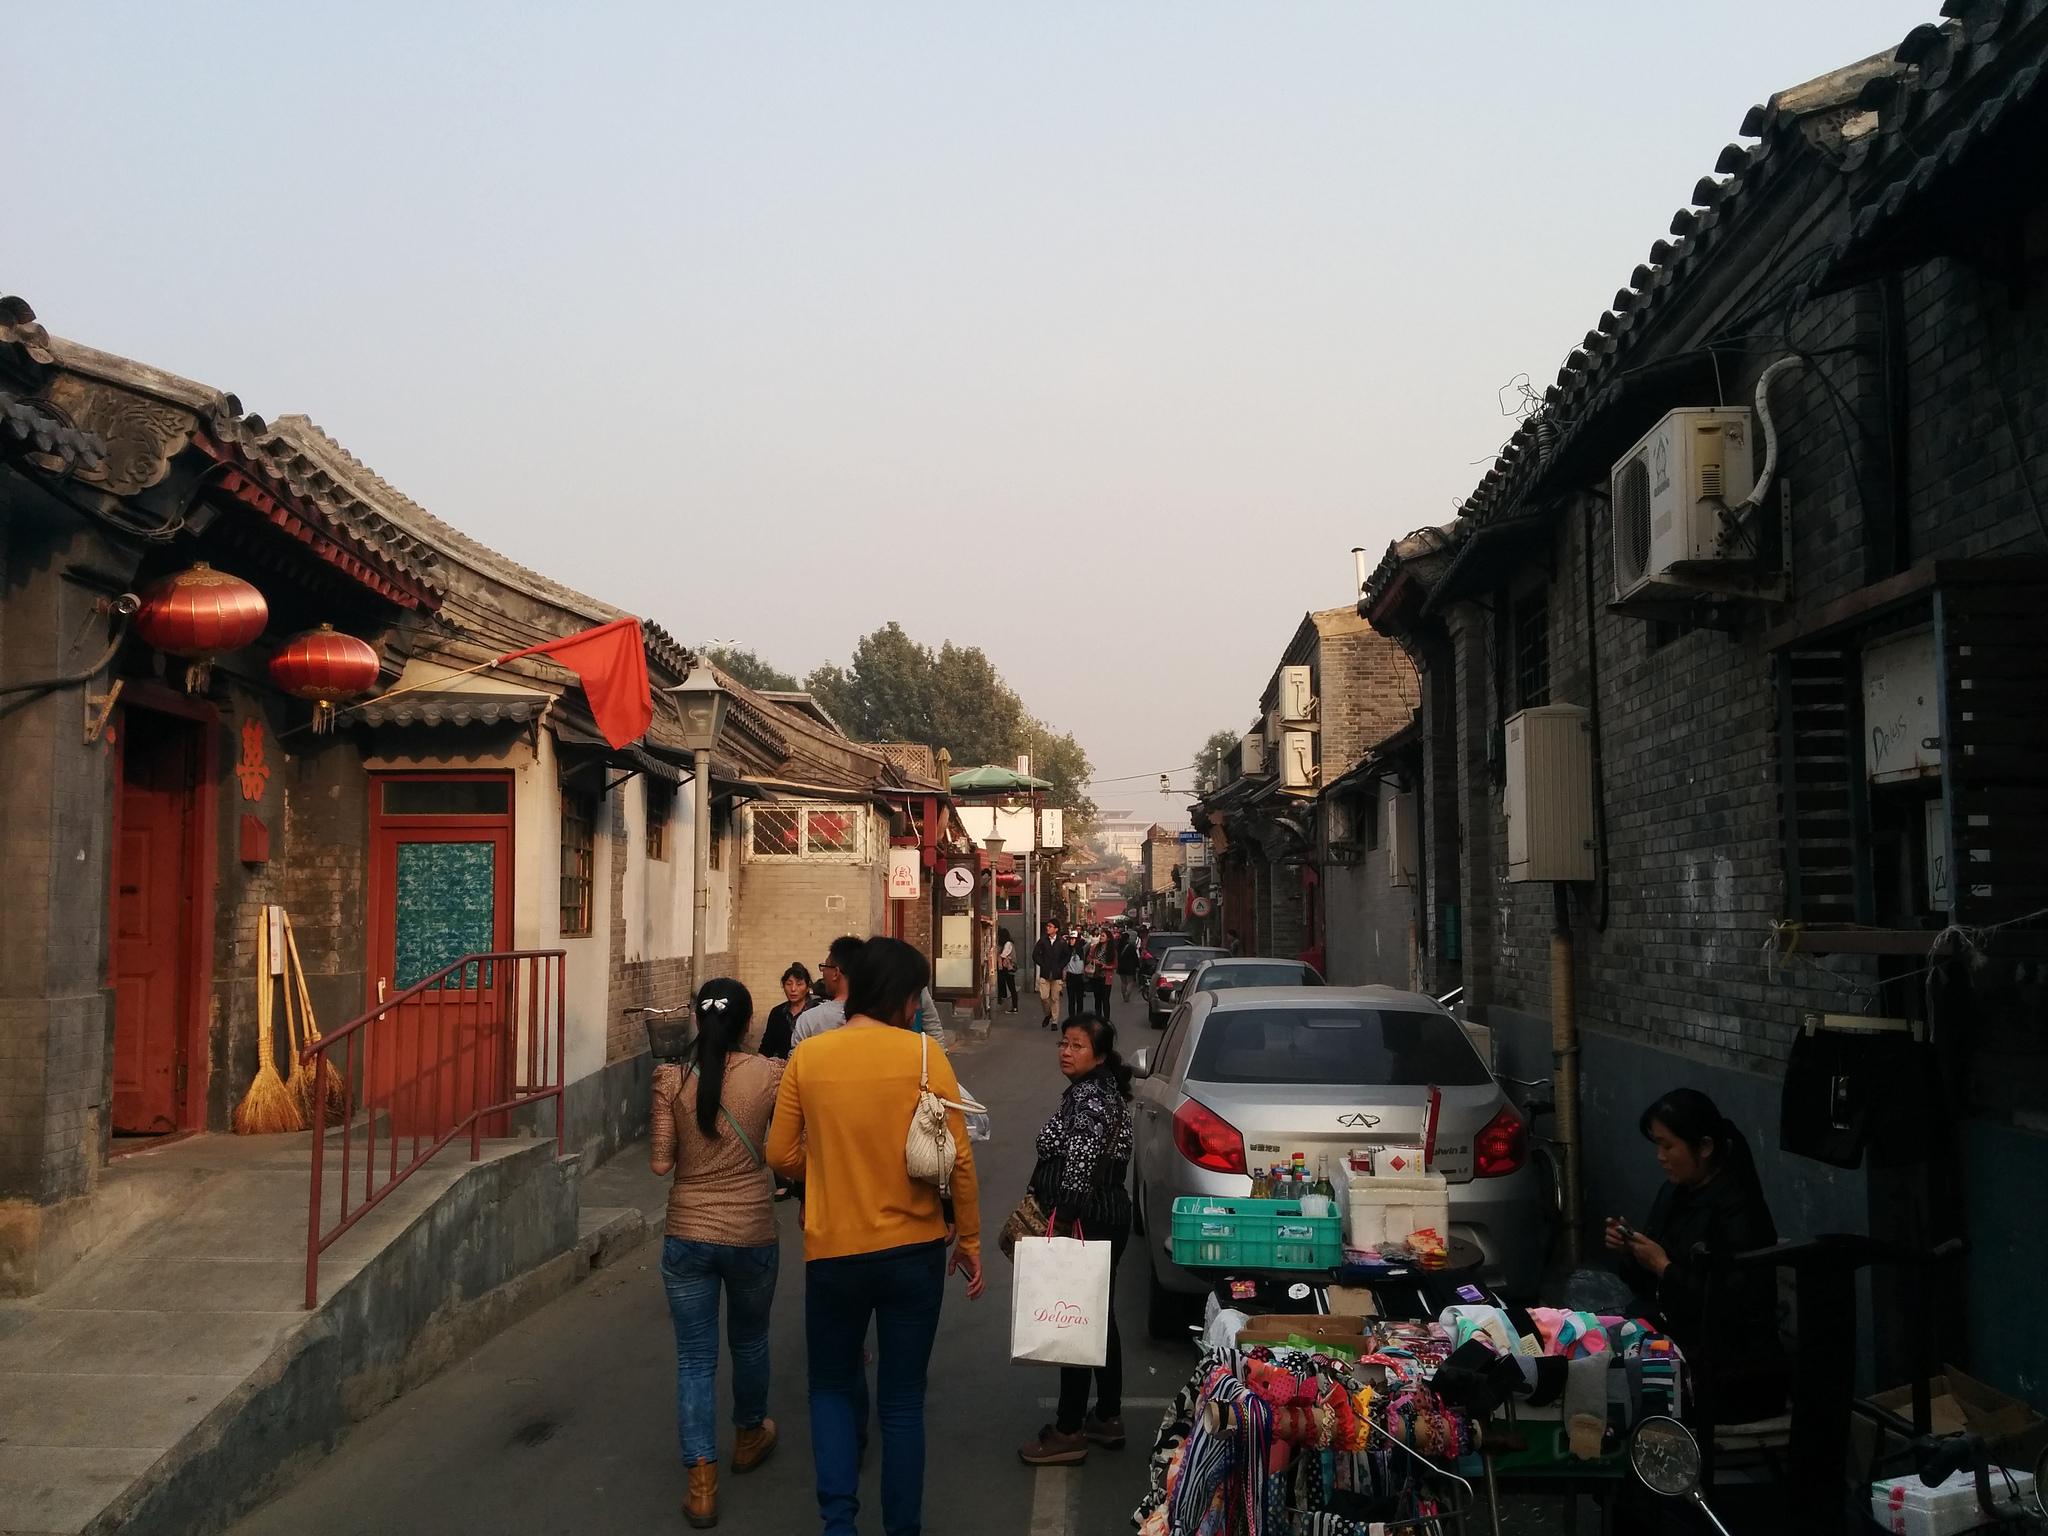 Cover image of this place Wudaoying Hutong (五道营胡同)